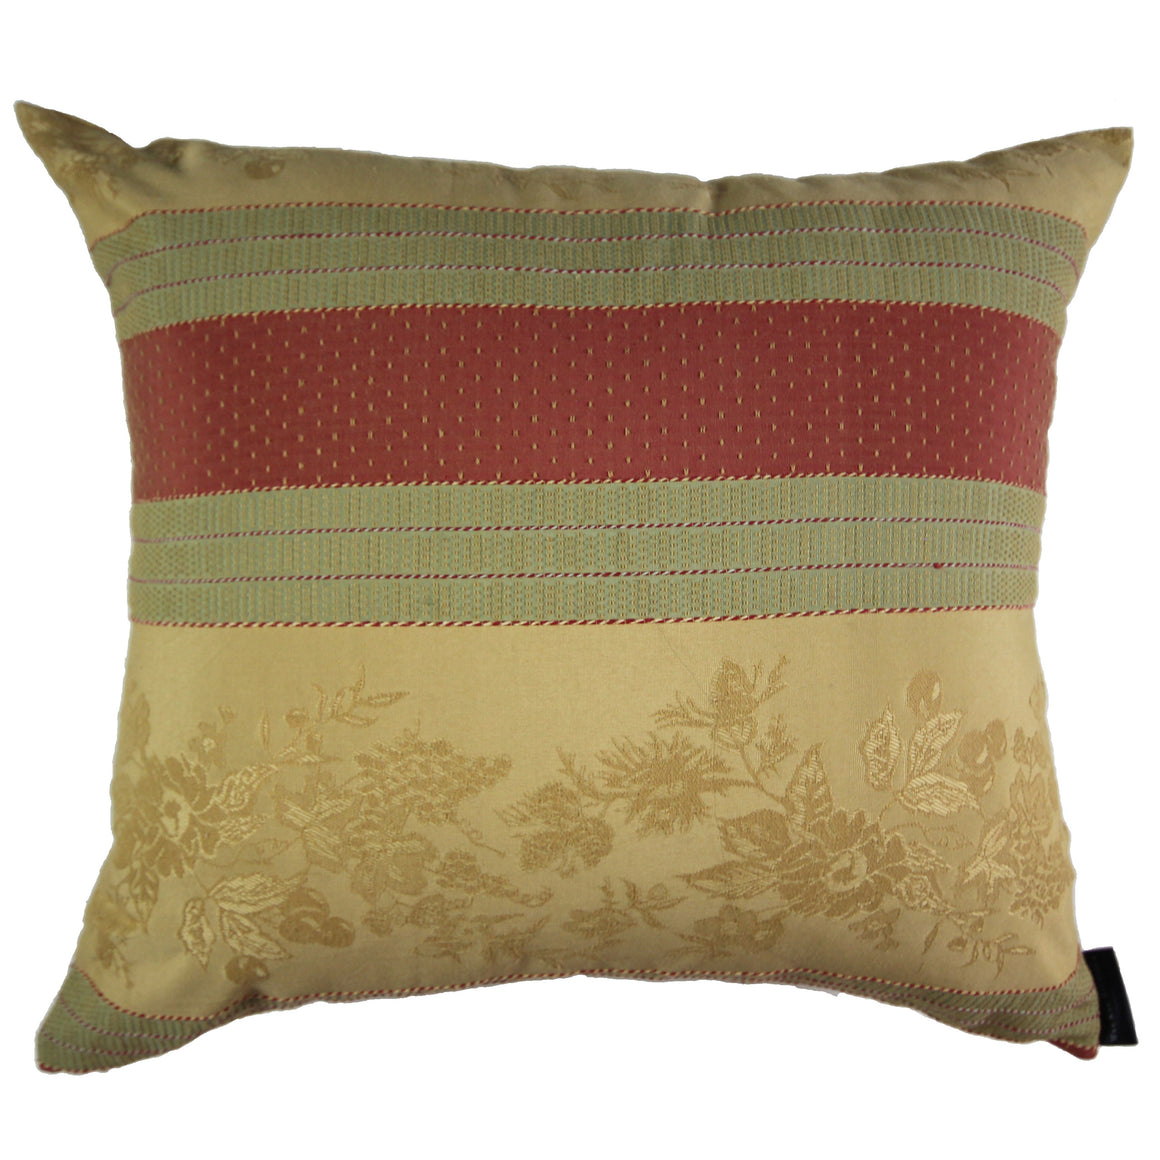 Elodie - Green, Yellow and Red Striped Floral Pillow Cover - 20x20 - 22x22 - 24x24